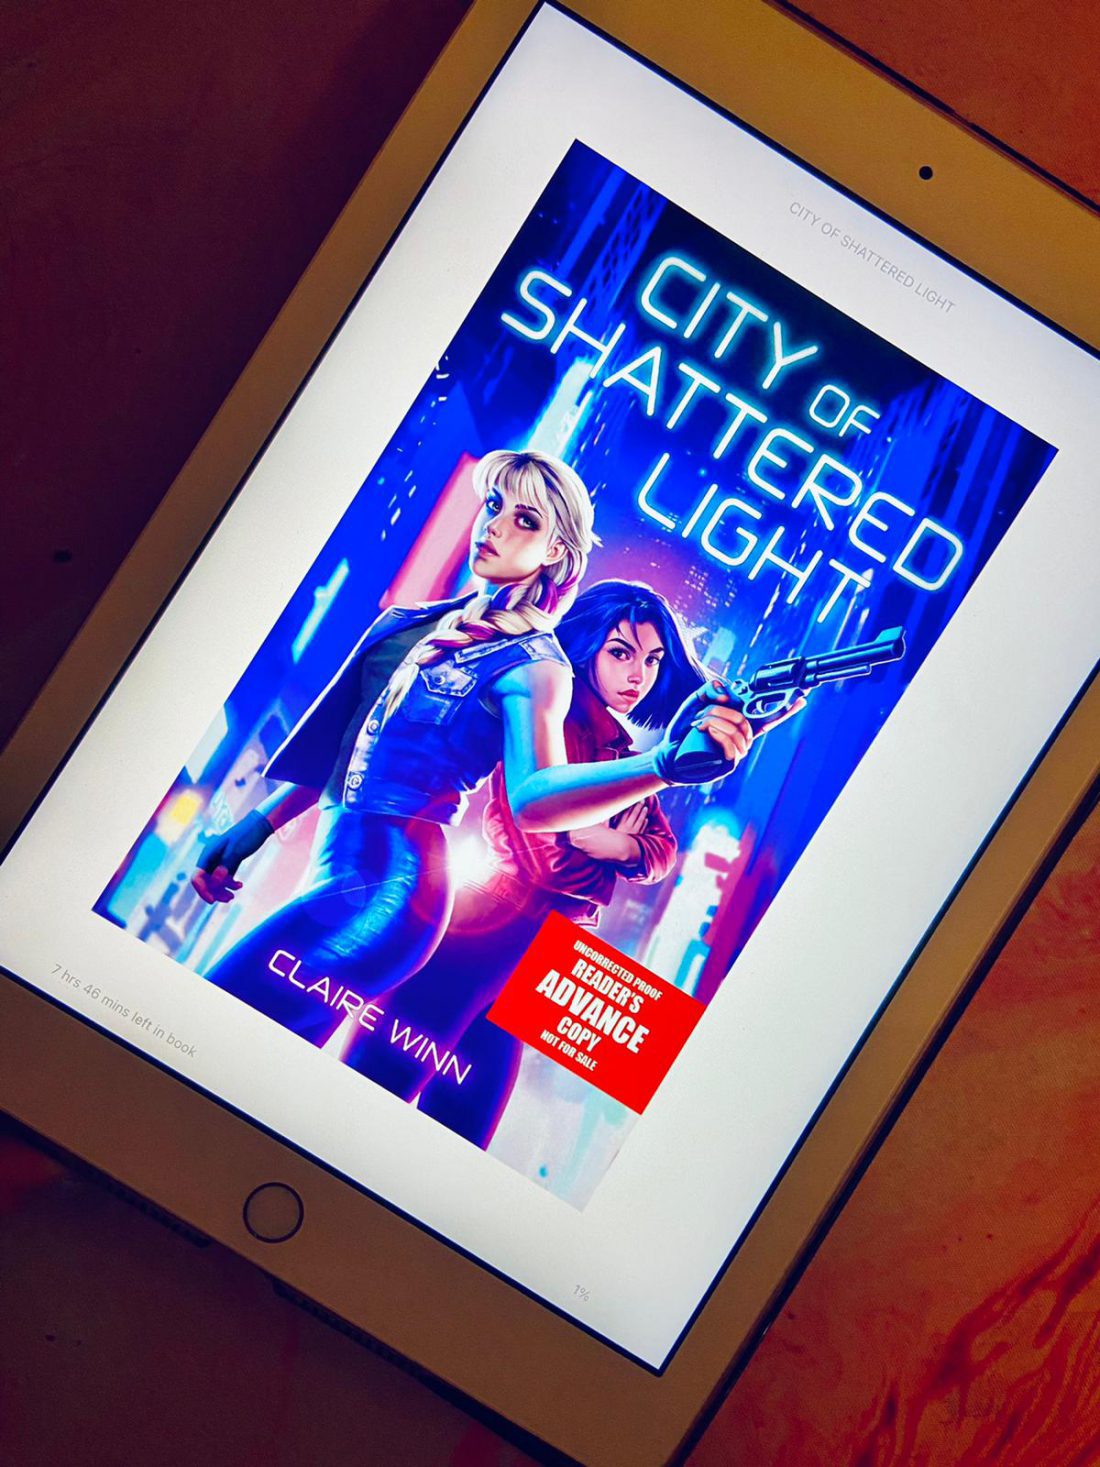 A picture of City of Shattered Light by Claire Winn